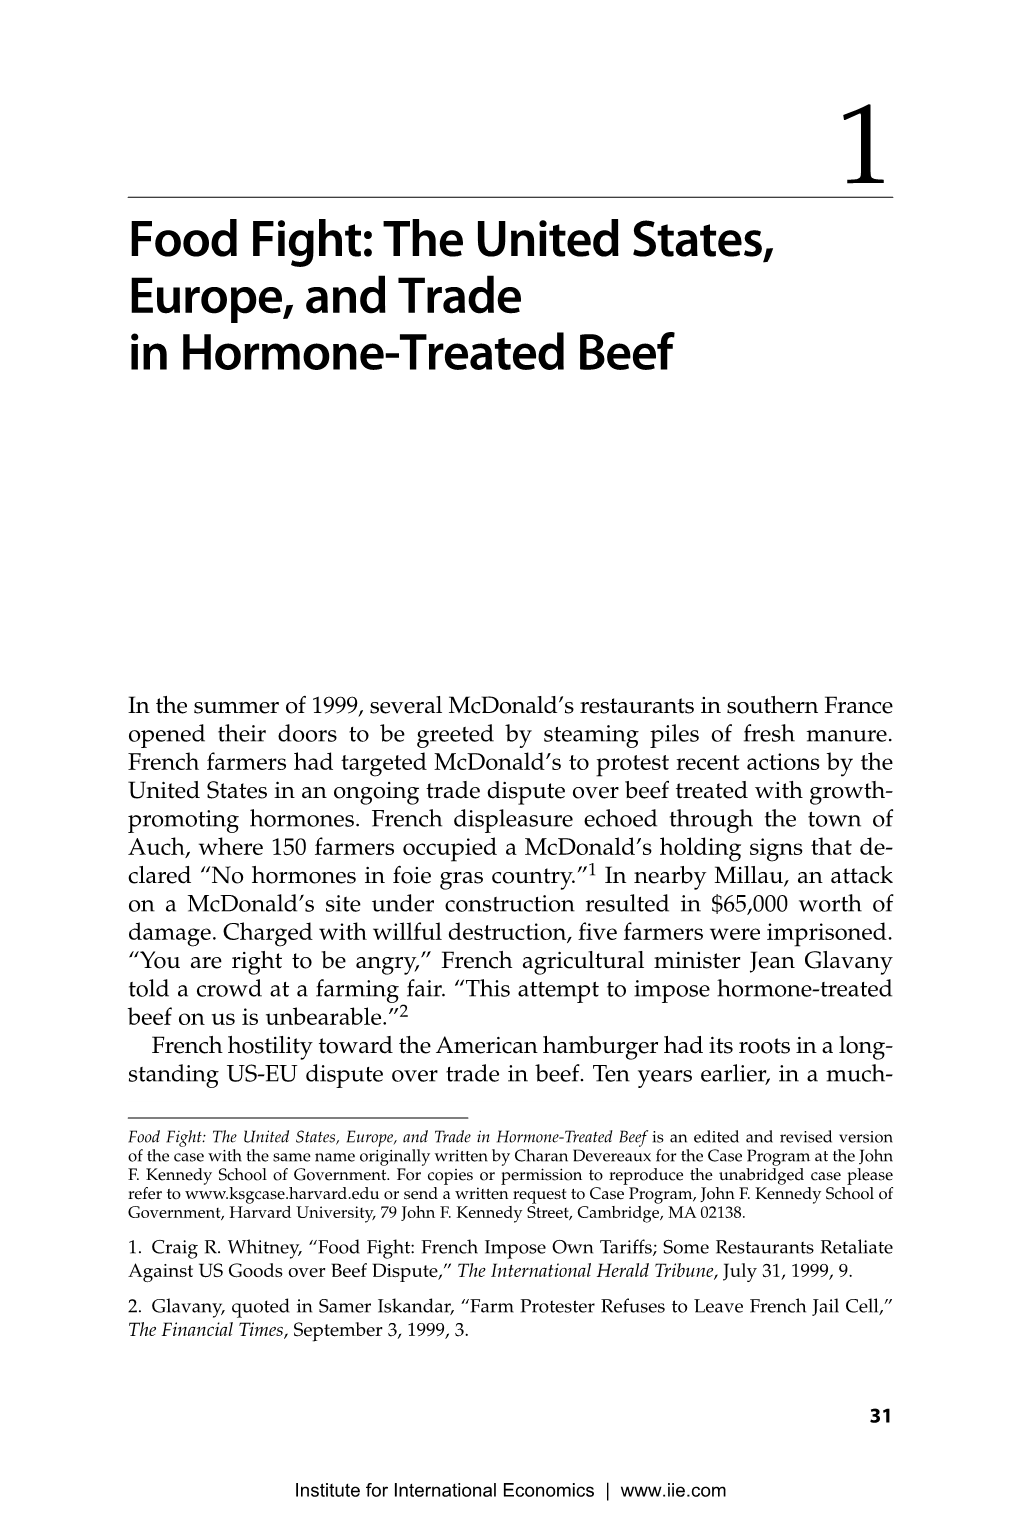 Food Fight: the United States, Europe, and Trade in Hormone-Treated Beef